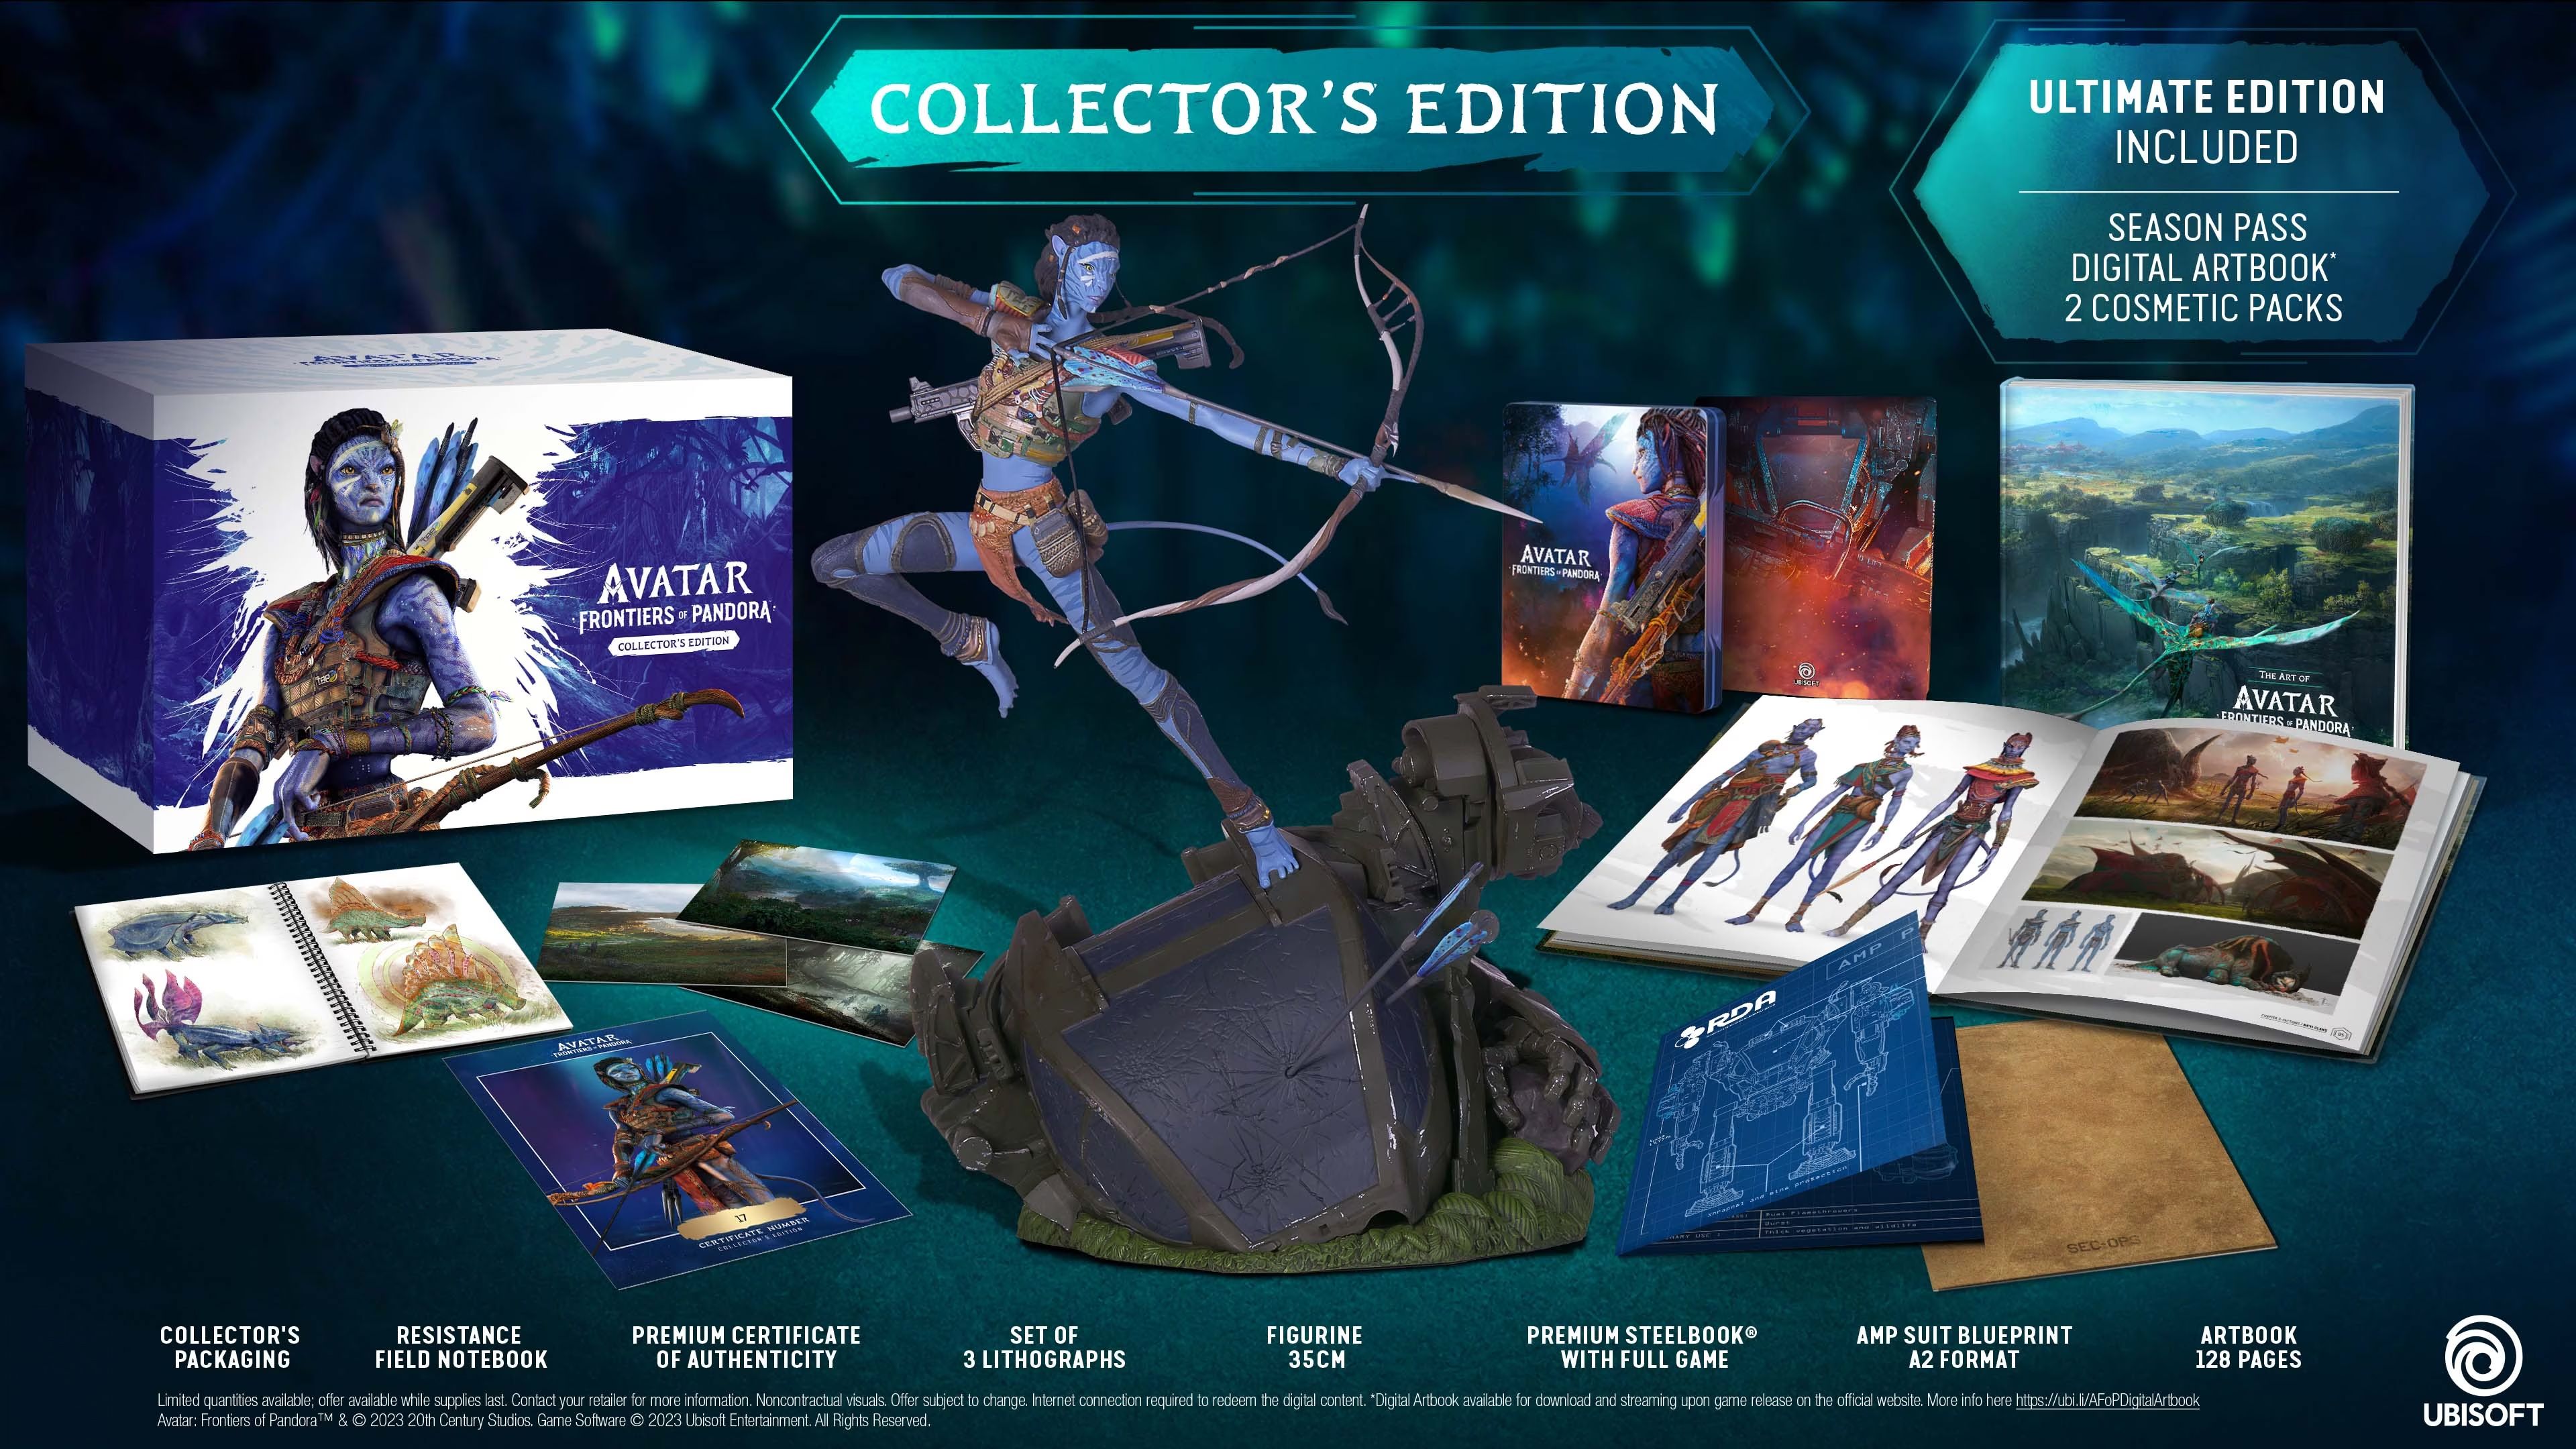 Avatar: Frontiers of Pandora's Collector's Edition content, which includes a statue, artbook and more